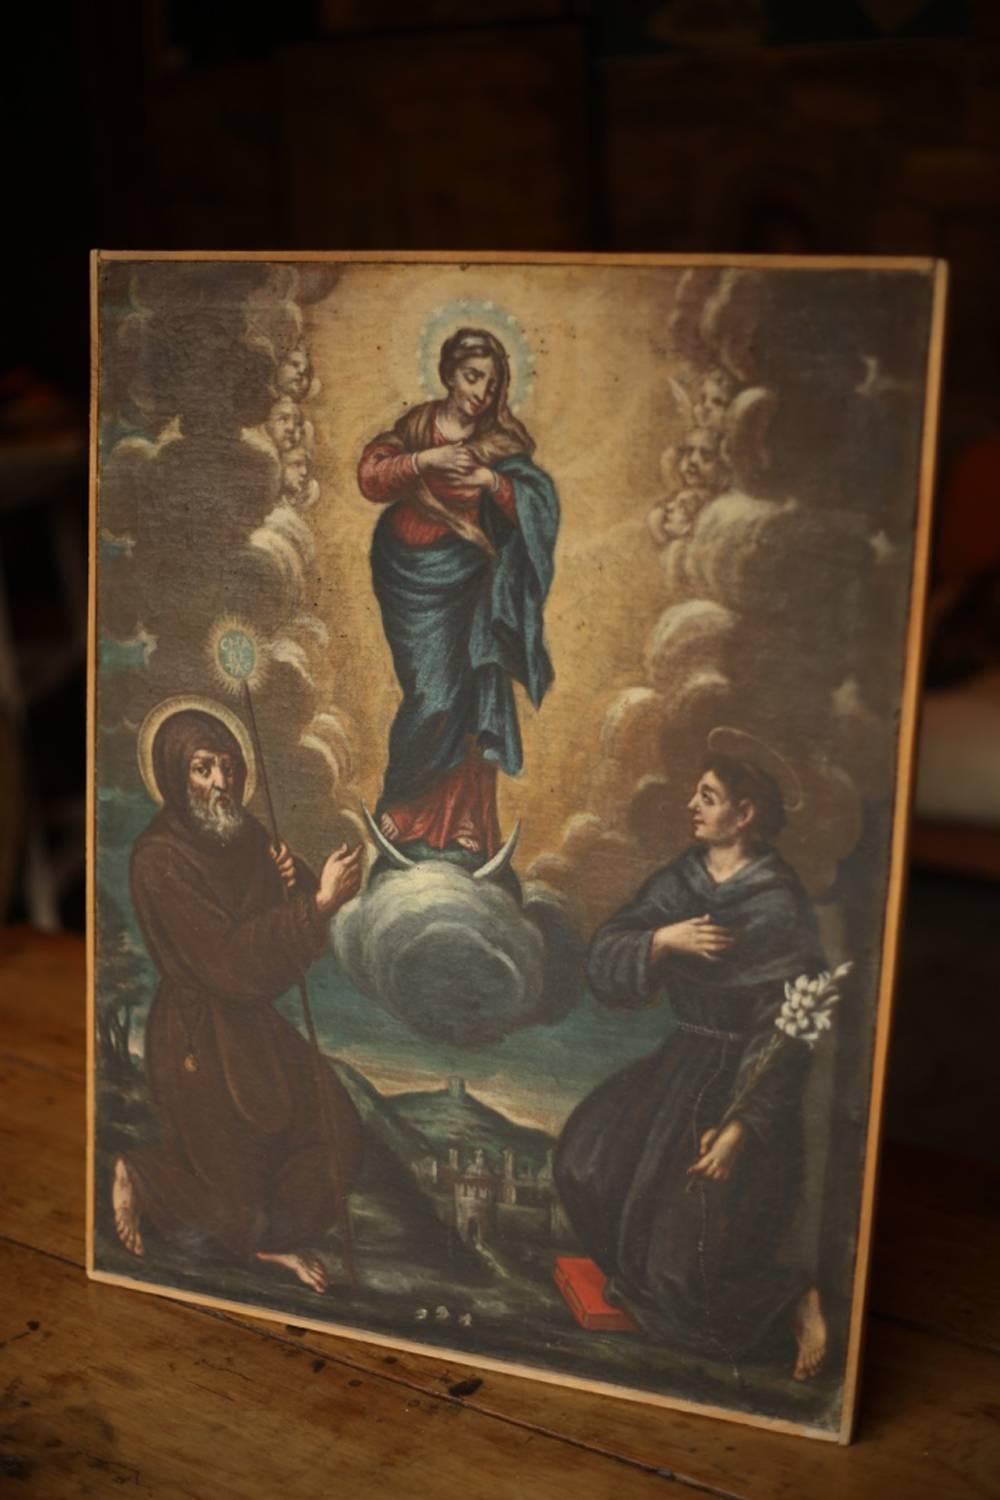 This is an exceptional piece of Religious art work. It dates to the 18th century and is Italian in origin. The painting depicts the ascension of Mary. It is in a similar manner of the ascension of Christ painting. It shows the Virgin Mary raising up